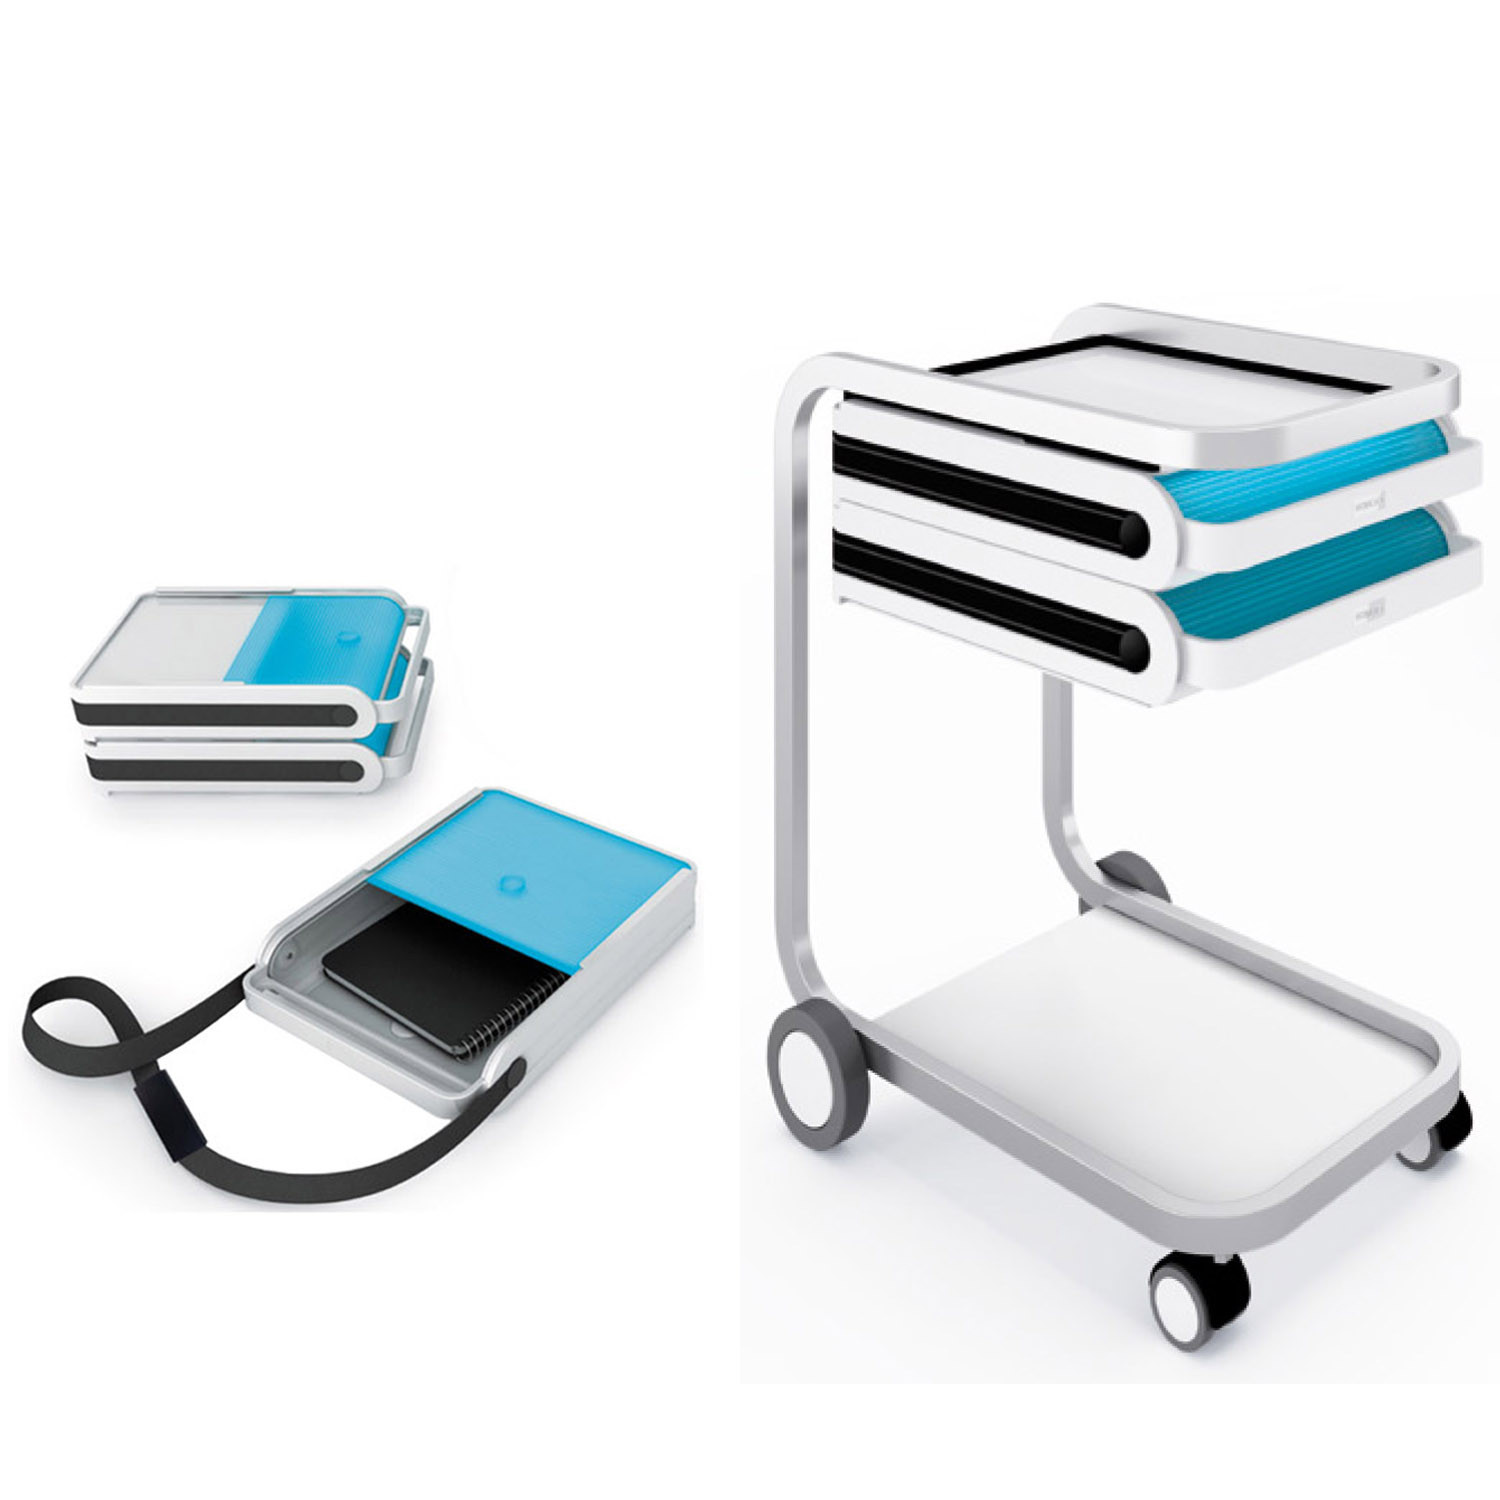 Cango Mobile Office Storage and Cart